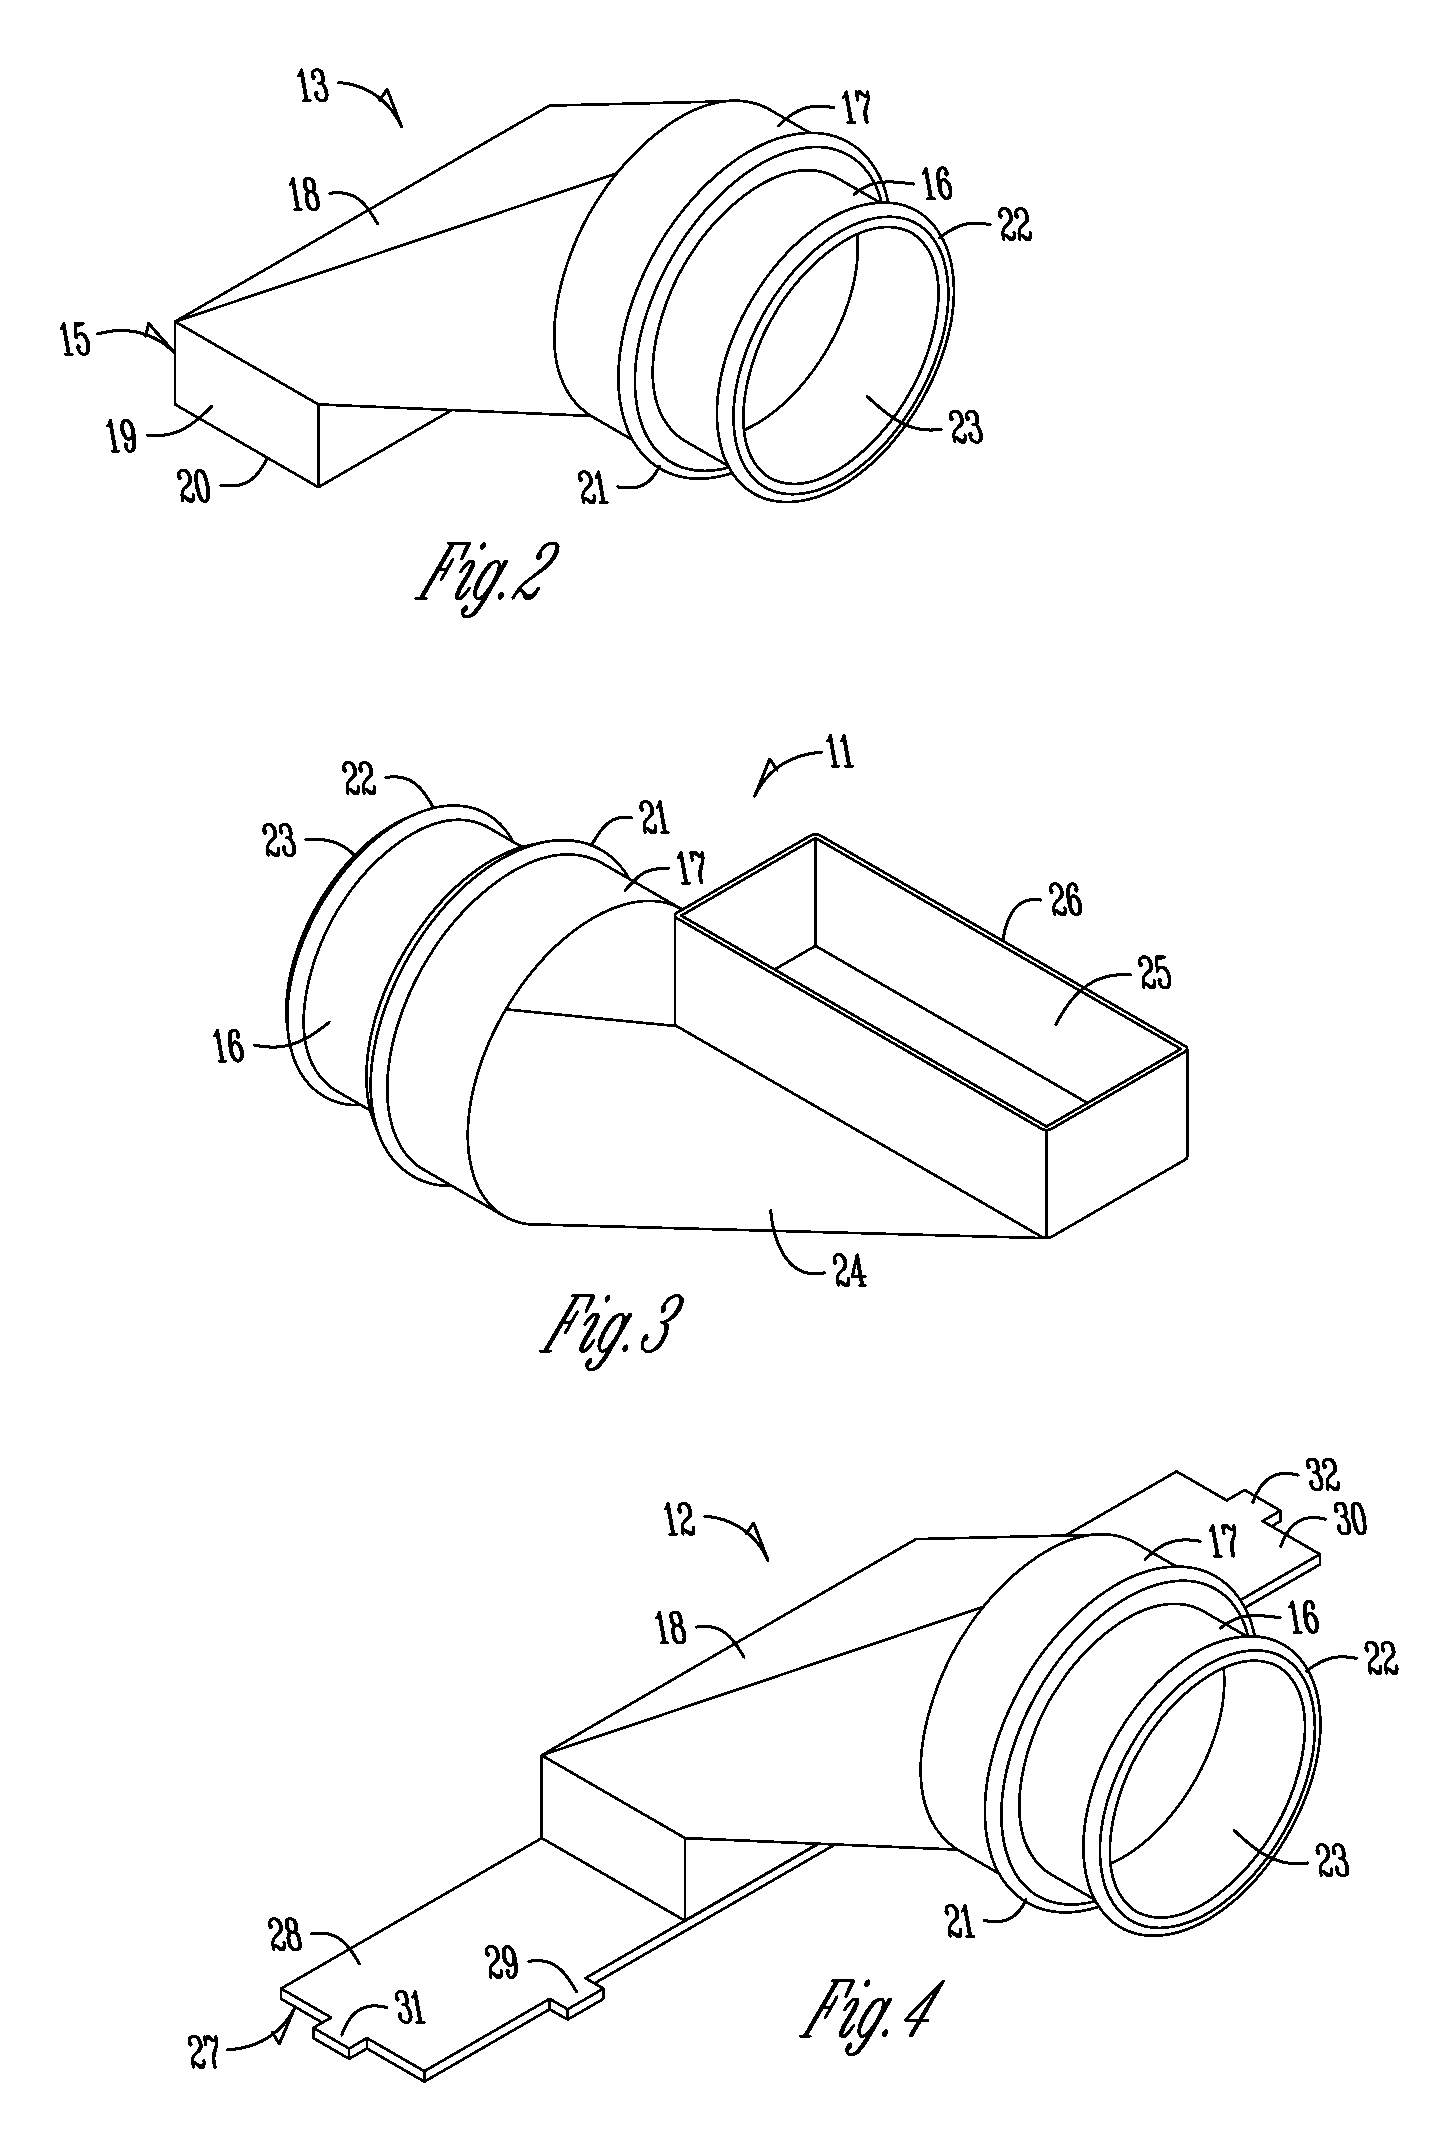 Plastic HVAC component system and method for installing the same